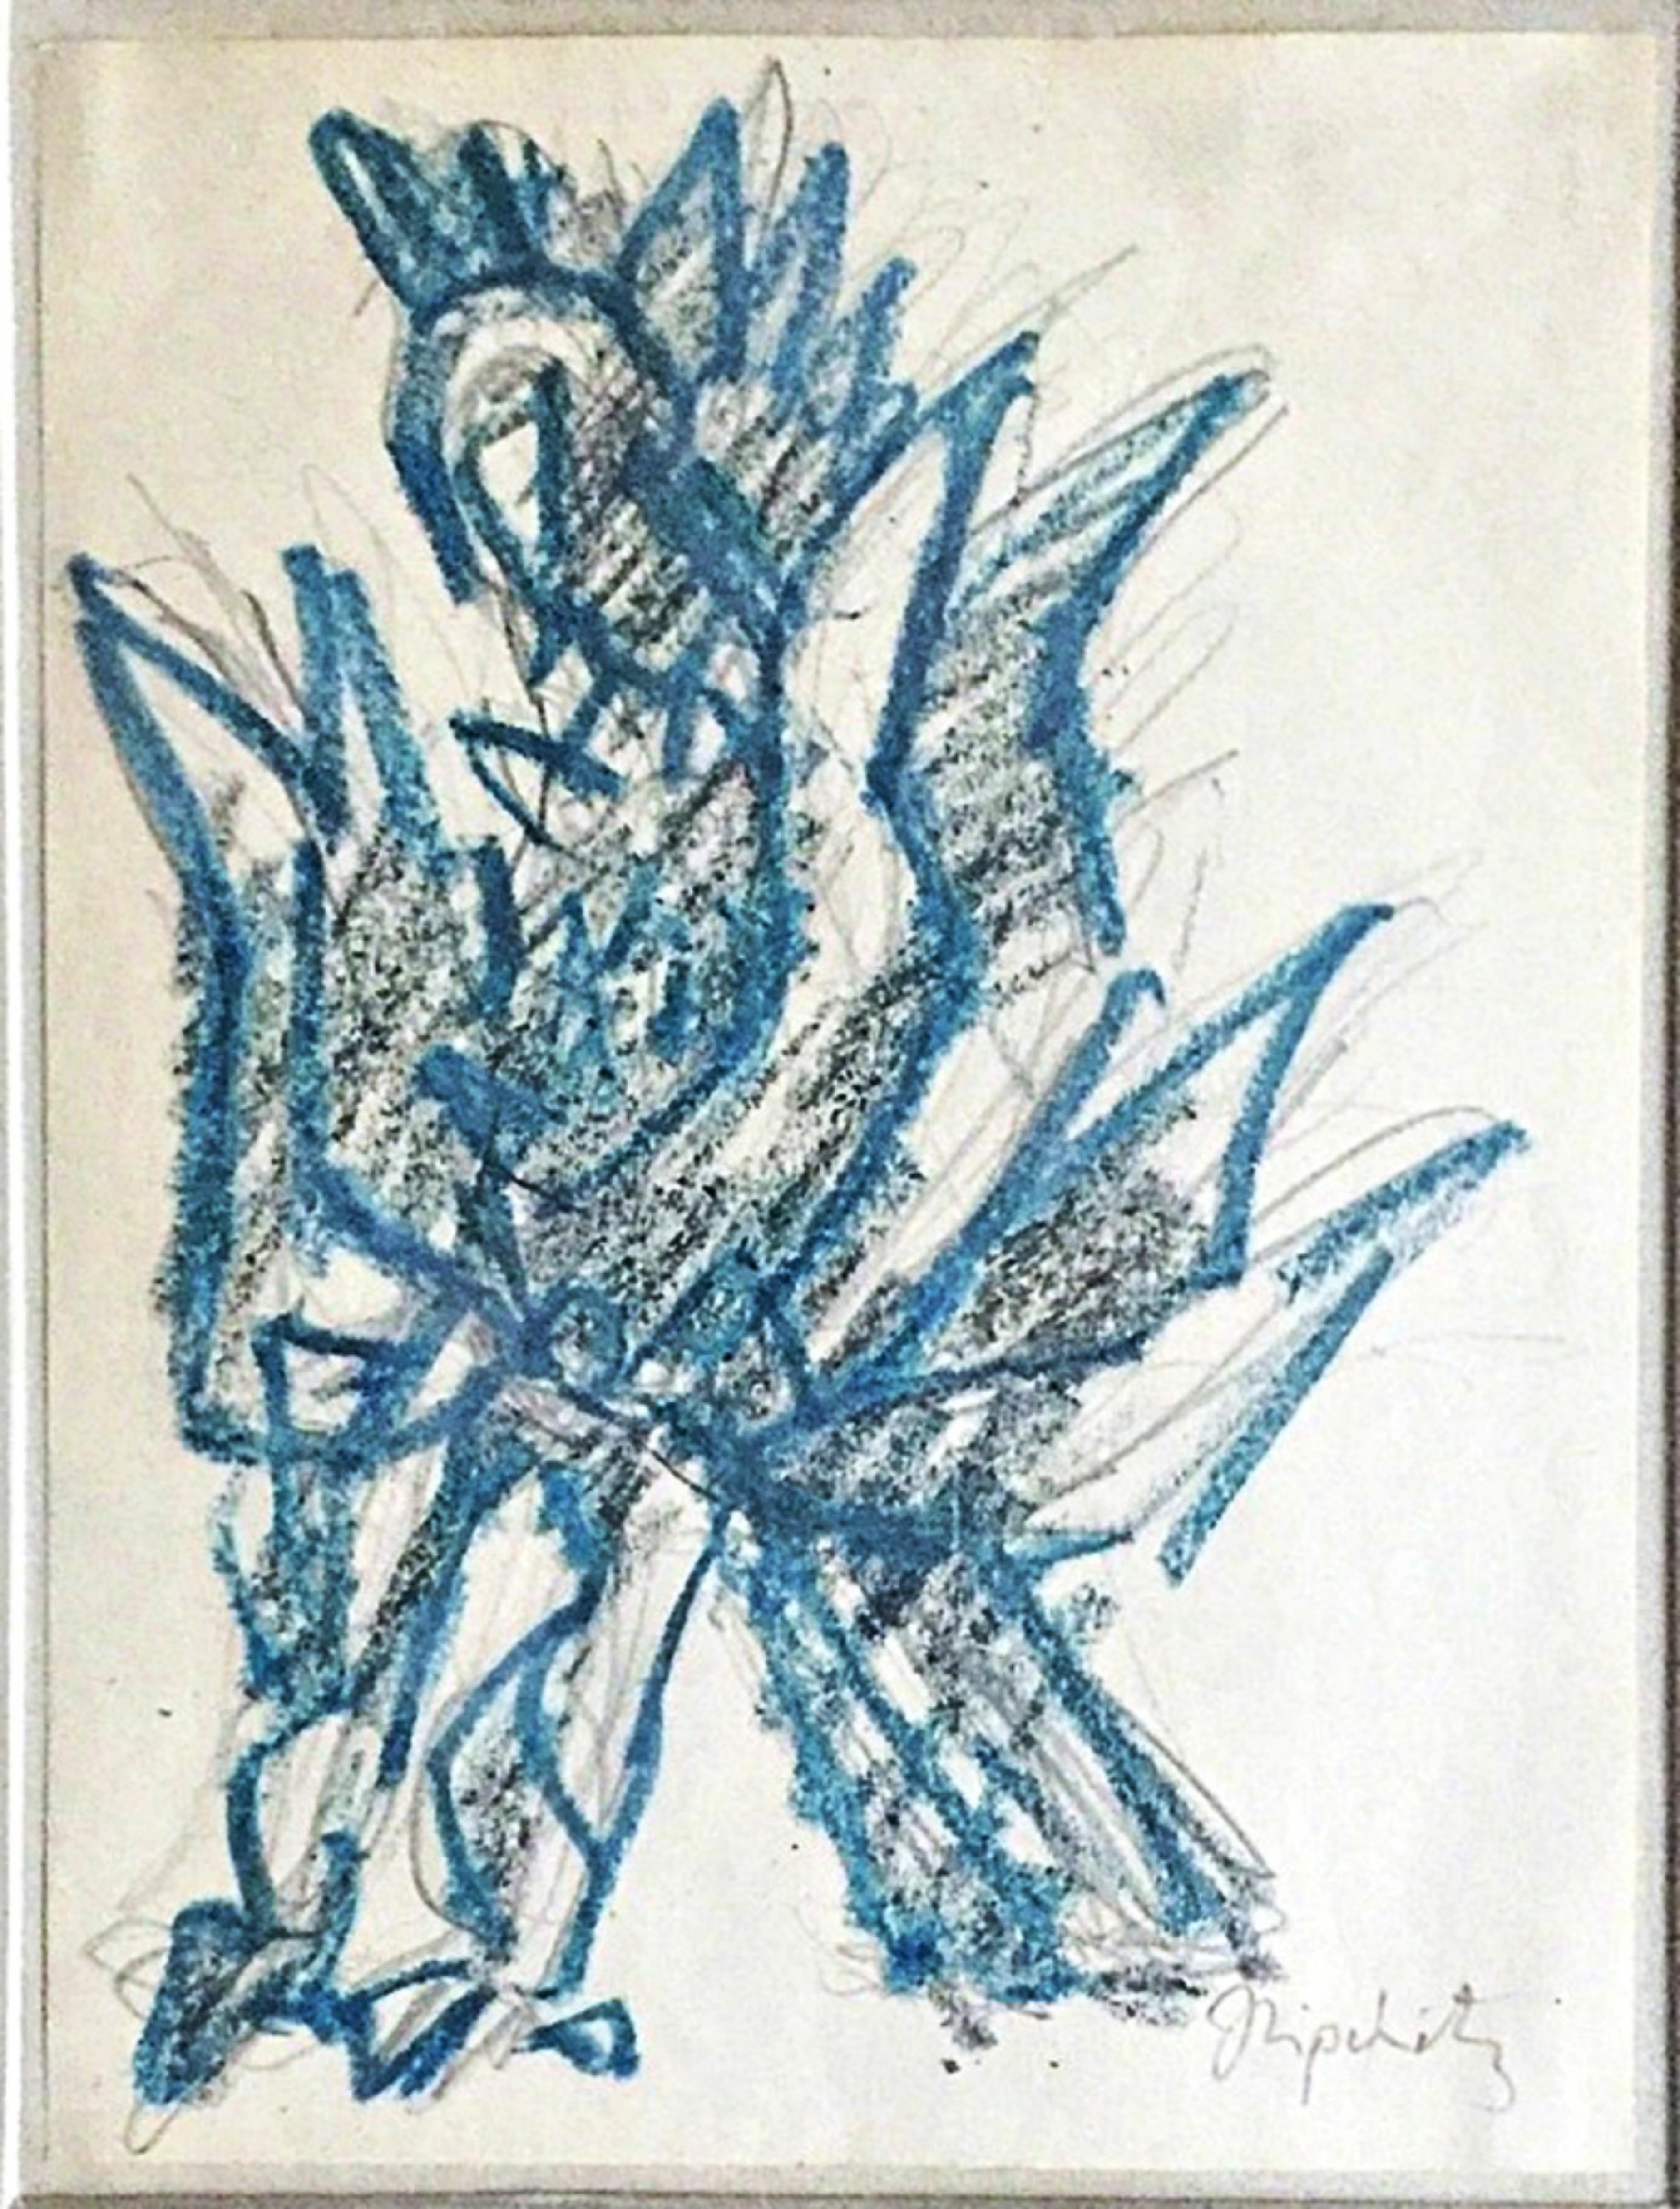 Study for a Lesson from a Disaster, original drawing by famed modernist sculptor - Mixed Media Art by Jacques Lipchitz